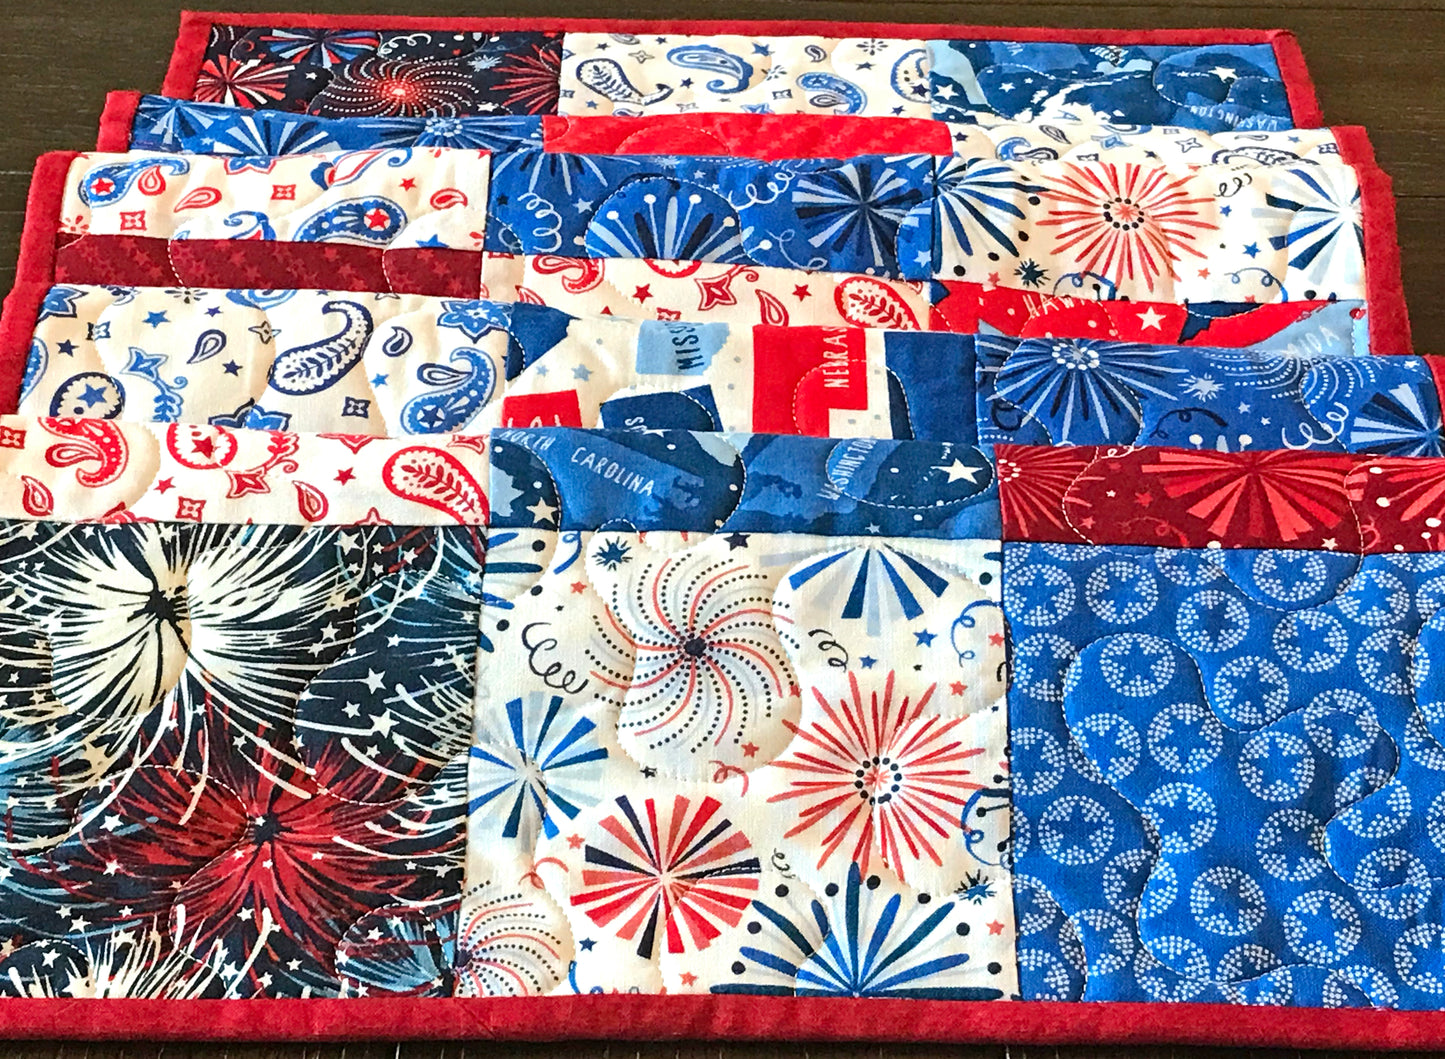 Patriotic Patchwork Table Runner - Handmade Quilts, Digital Patterns, and Home Décor items online - Cuddle Cat Quiltworks